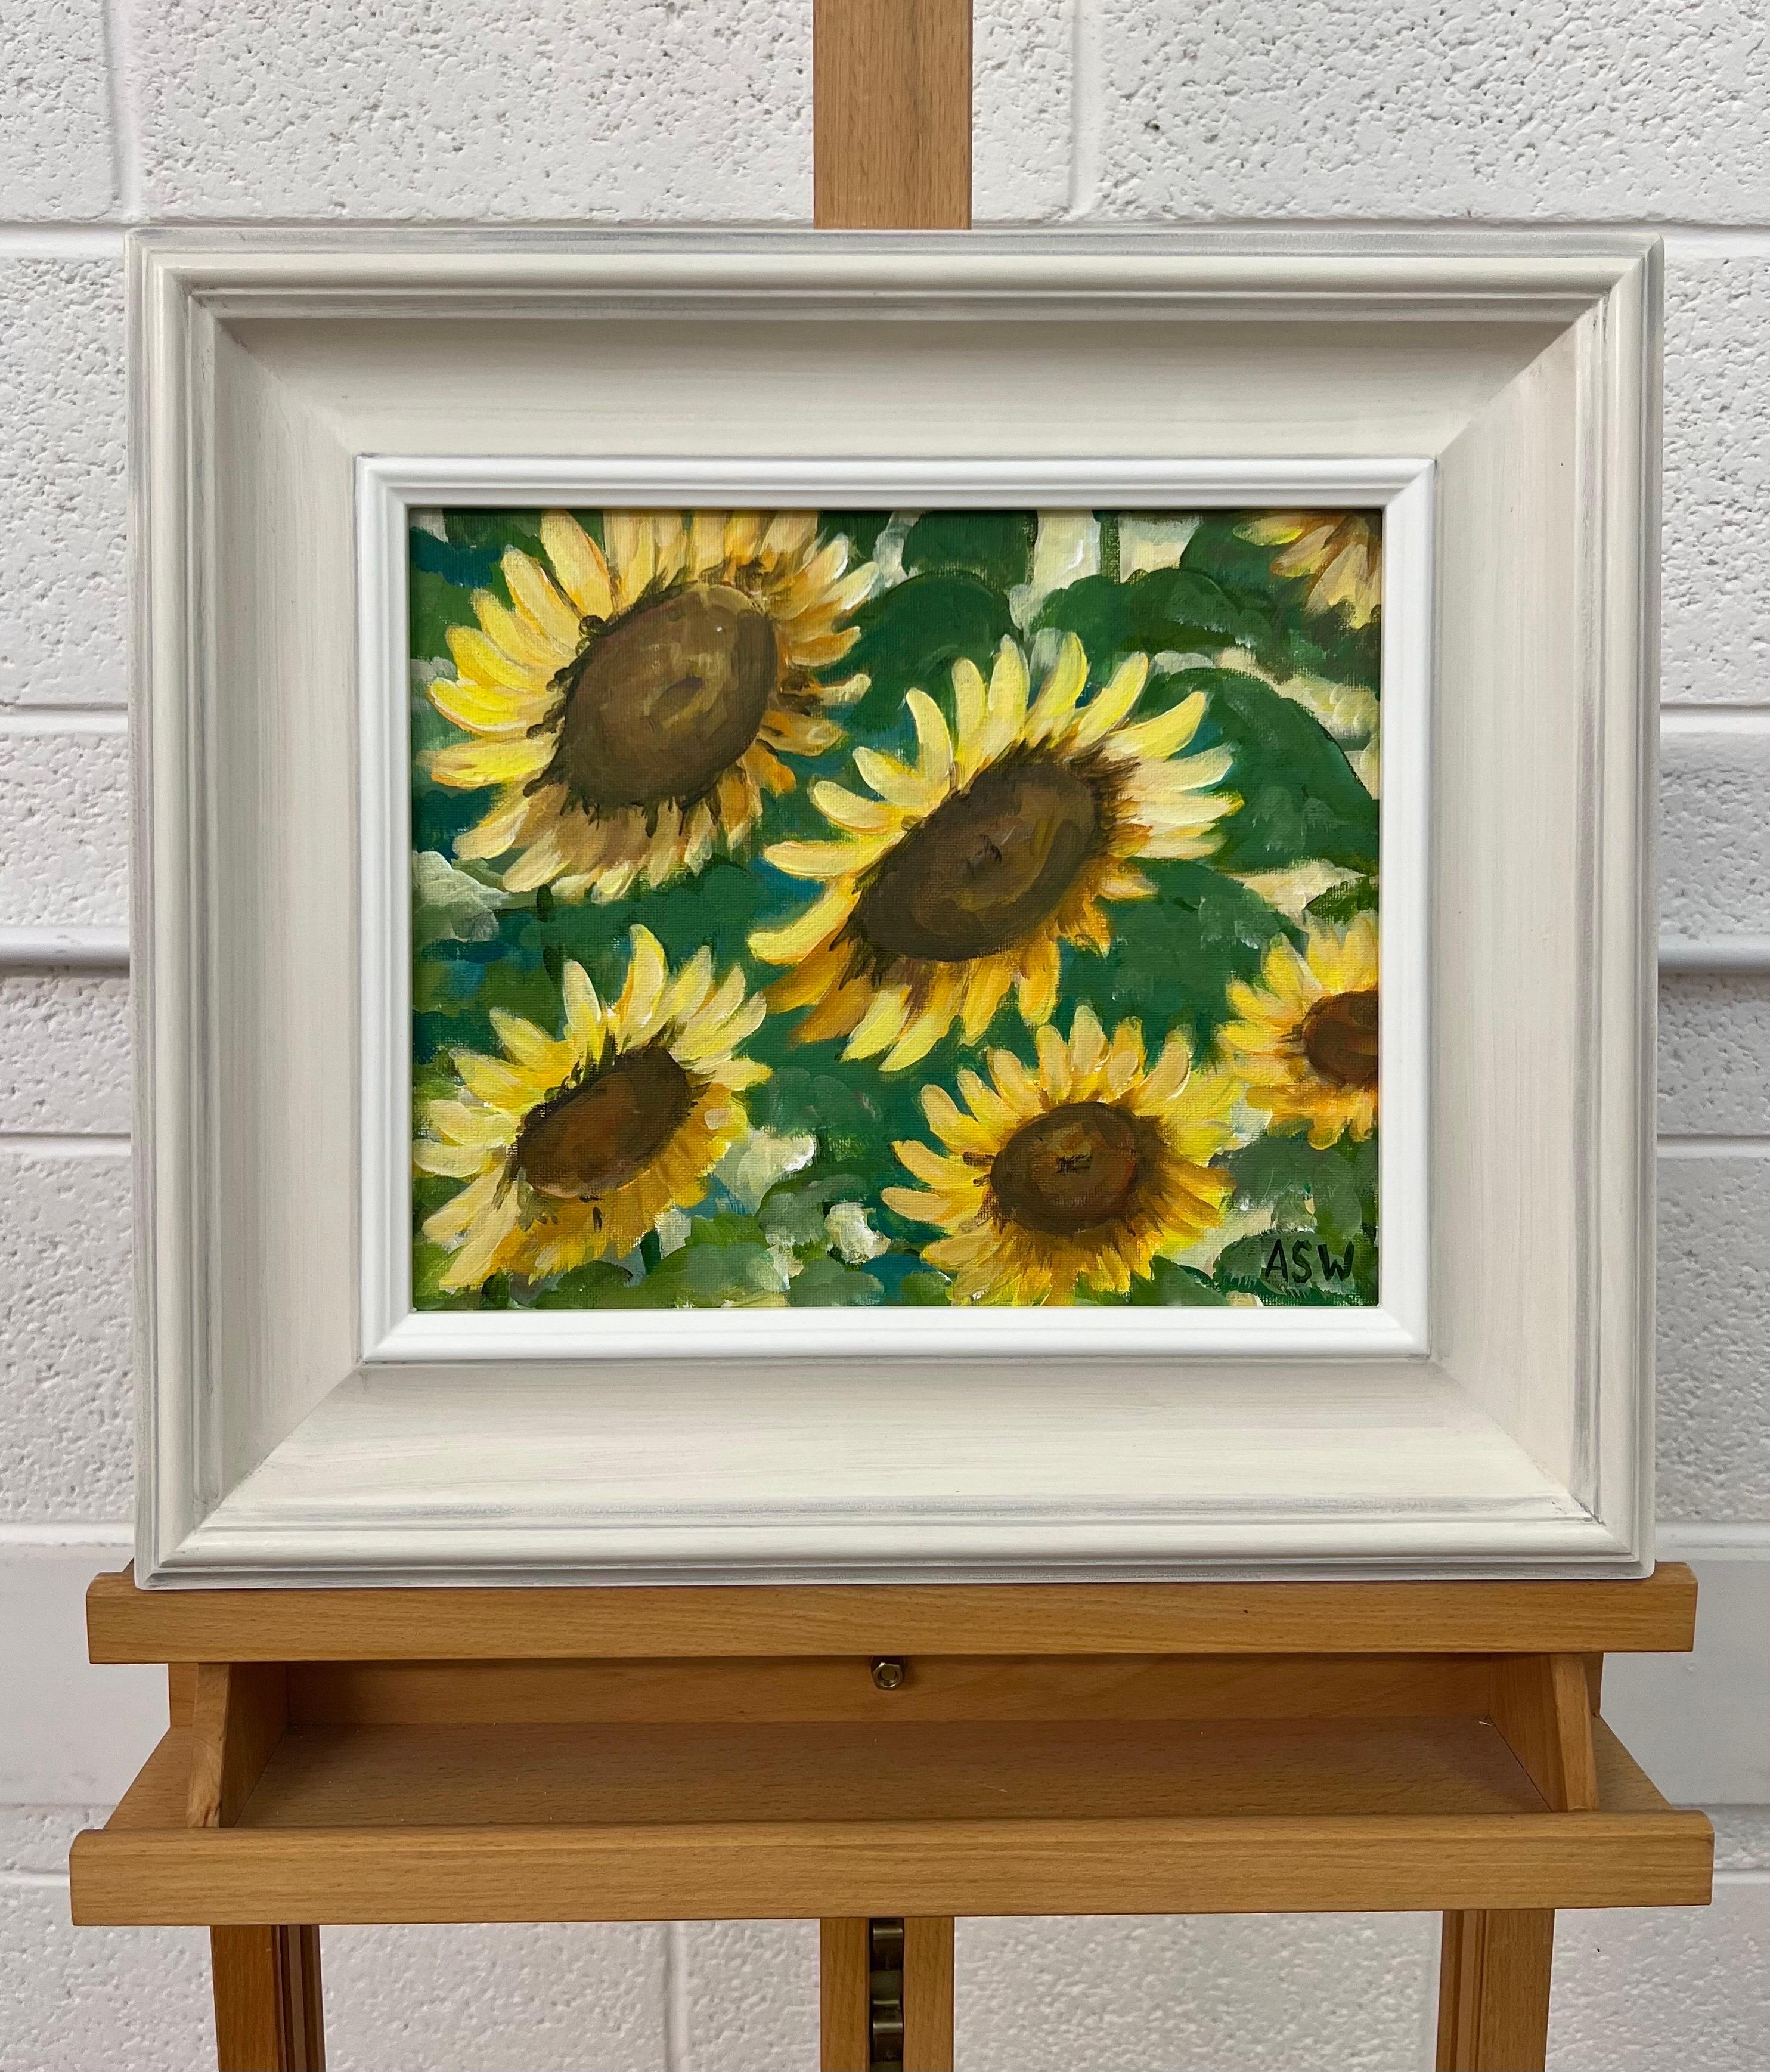 Golden Yellow Sunflowers Study on Green Background by Contemporary British Artist, Angela Wakefield.

Art measures 12 x 10 inches
Frame measure 18 x 16 inches

Angela Wakefield has twice been on the front cover of ‘Art of England’ and featured in